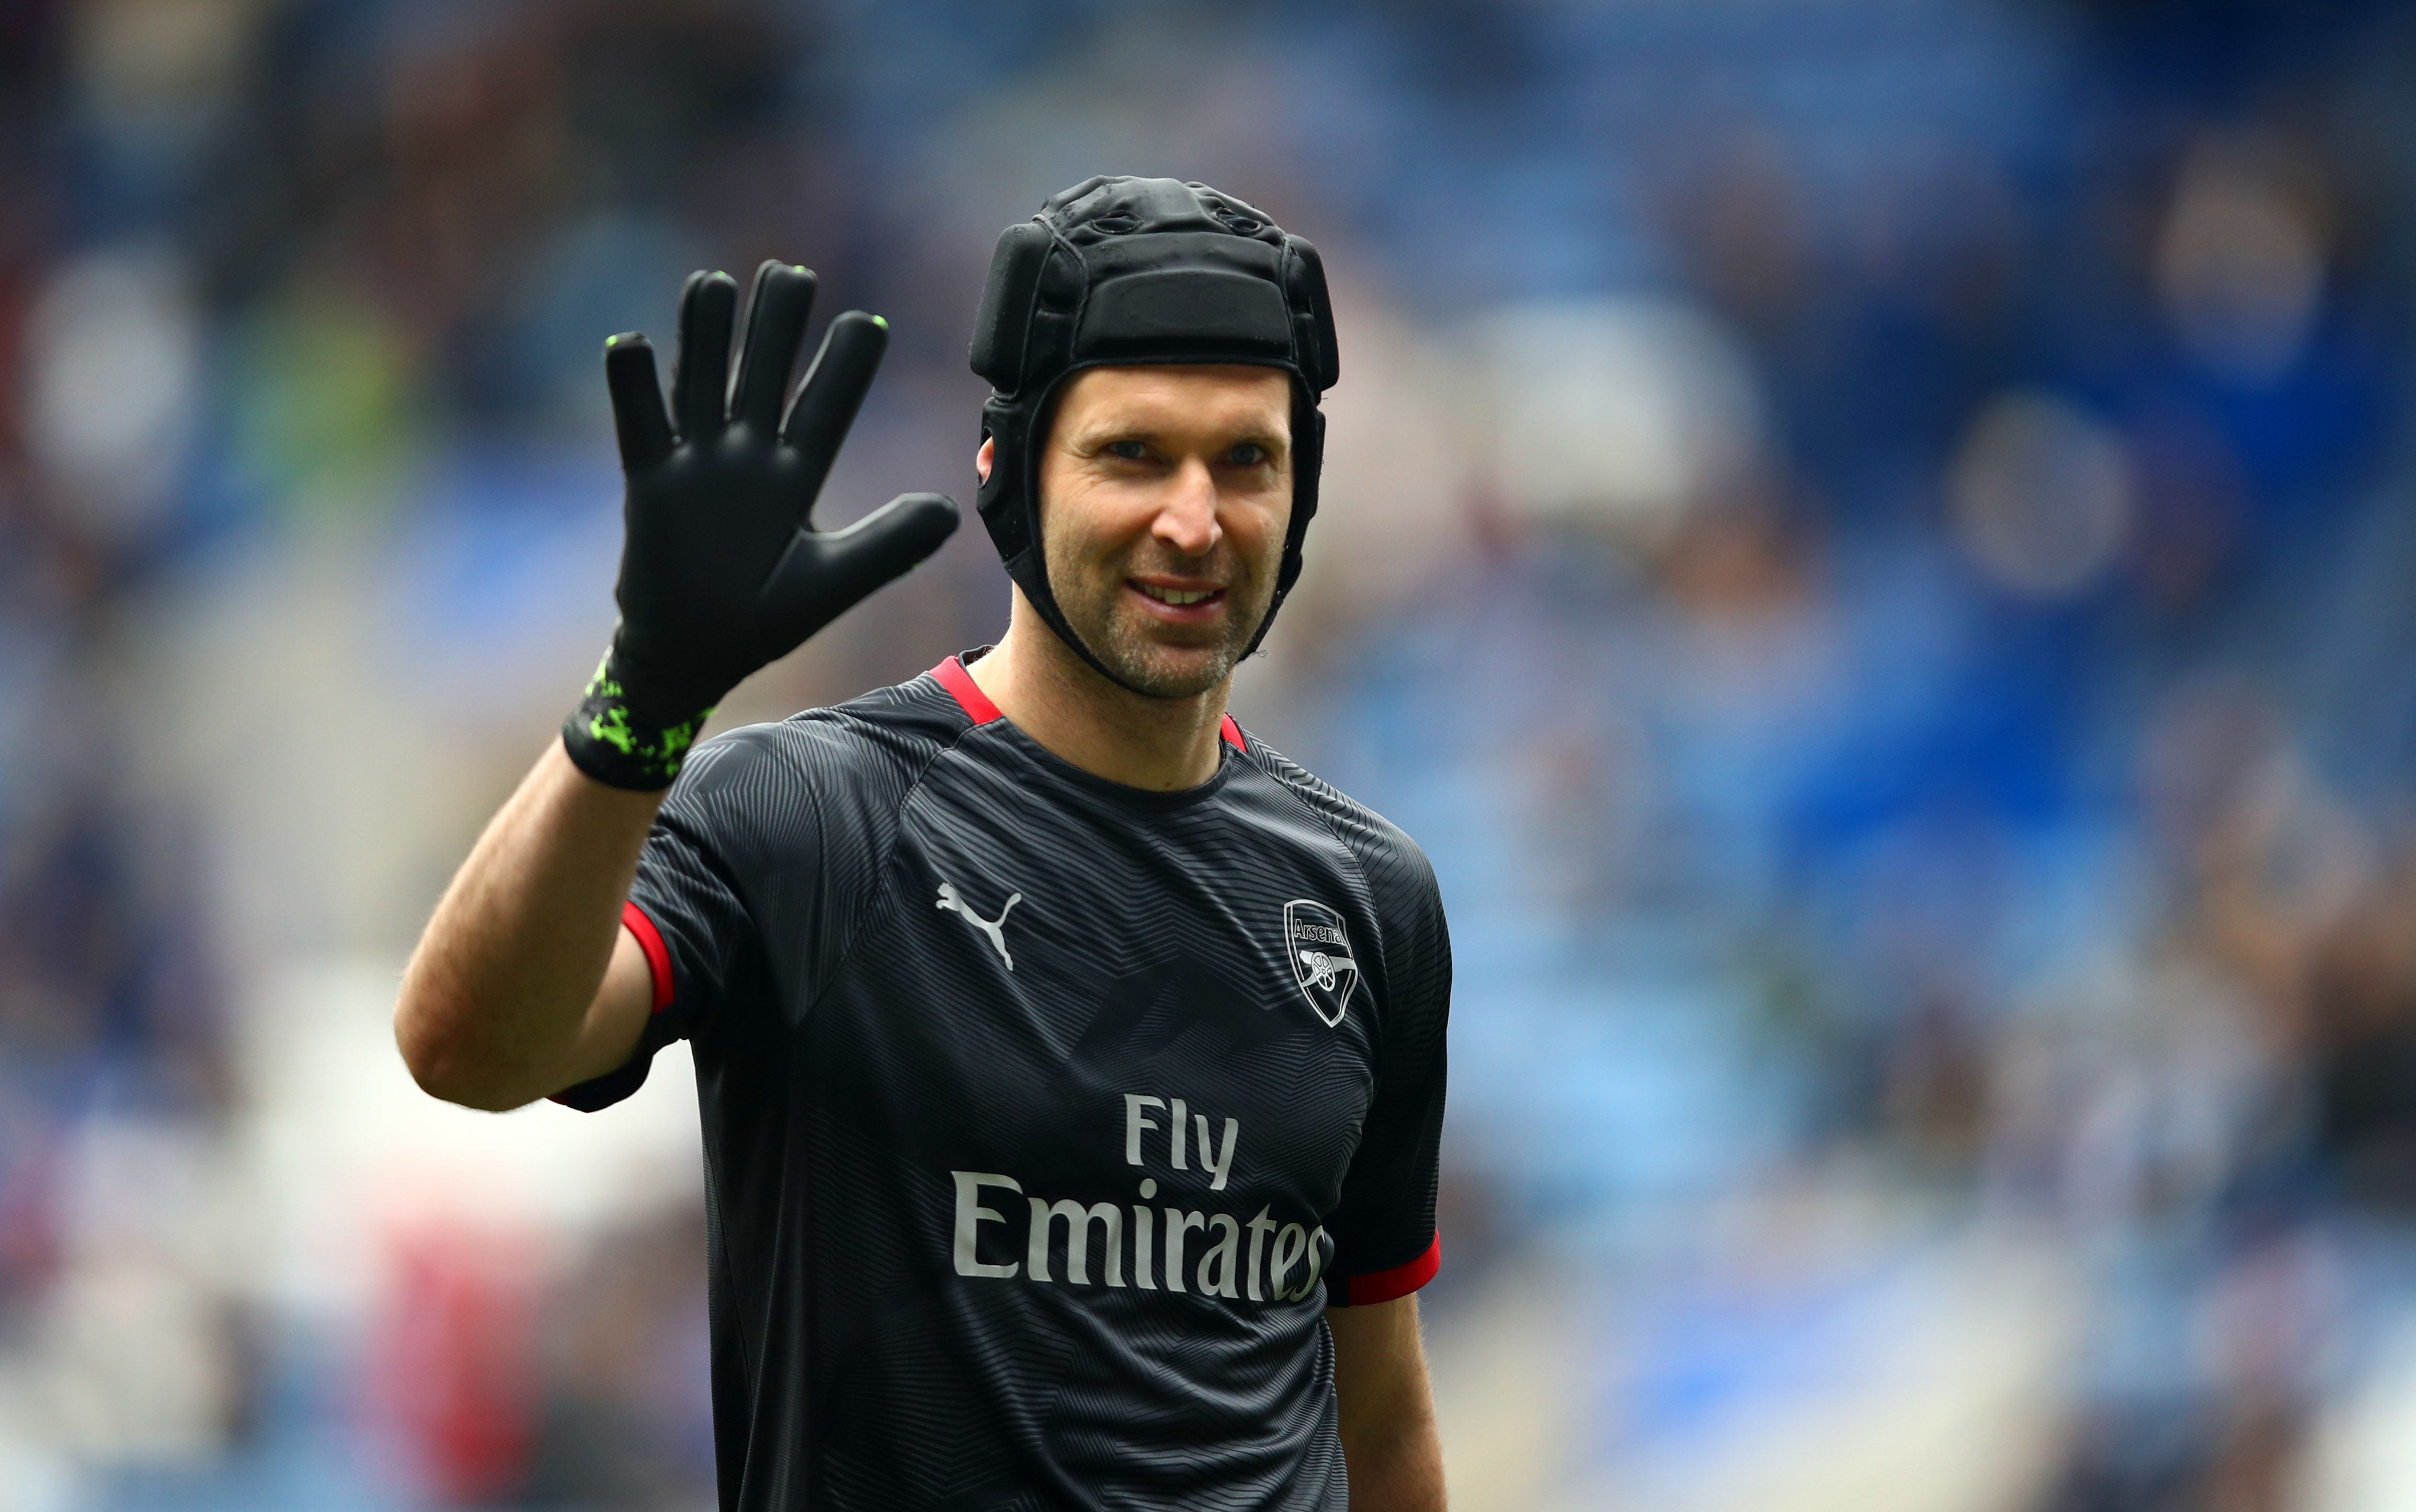 Cech Stars In Ice Hockey Match Before Revealing He Had To Return To Arsenal  Training Immediately